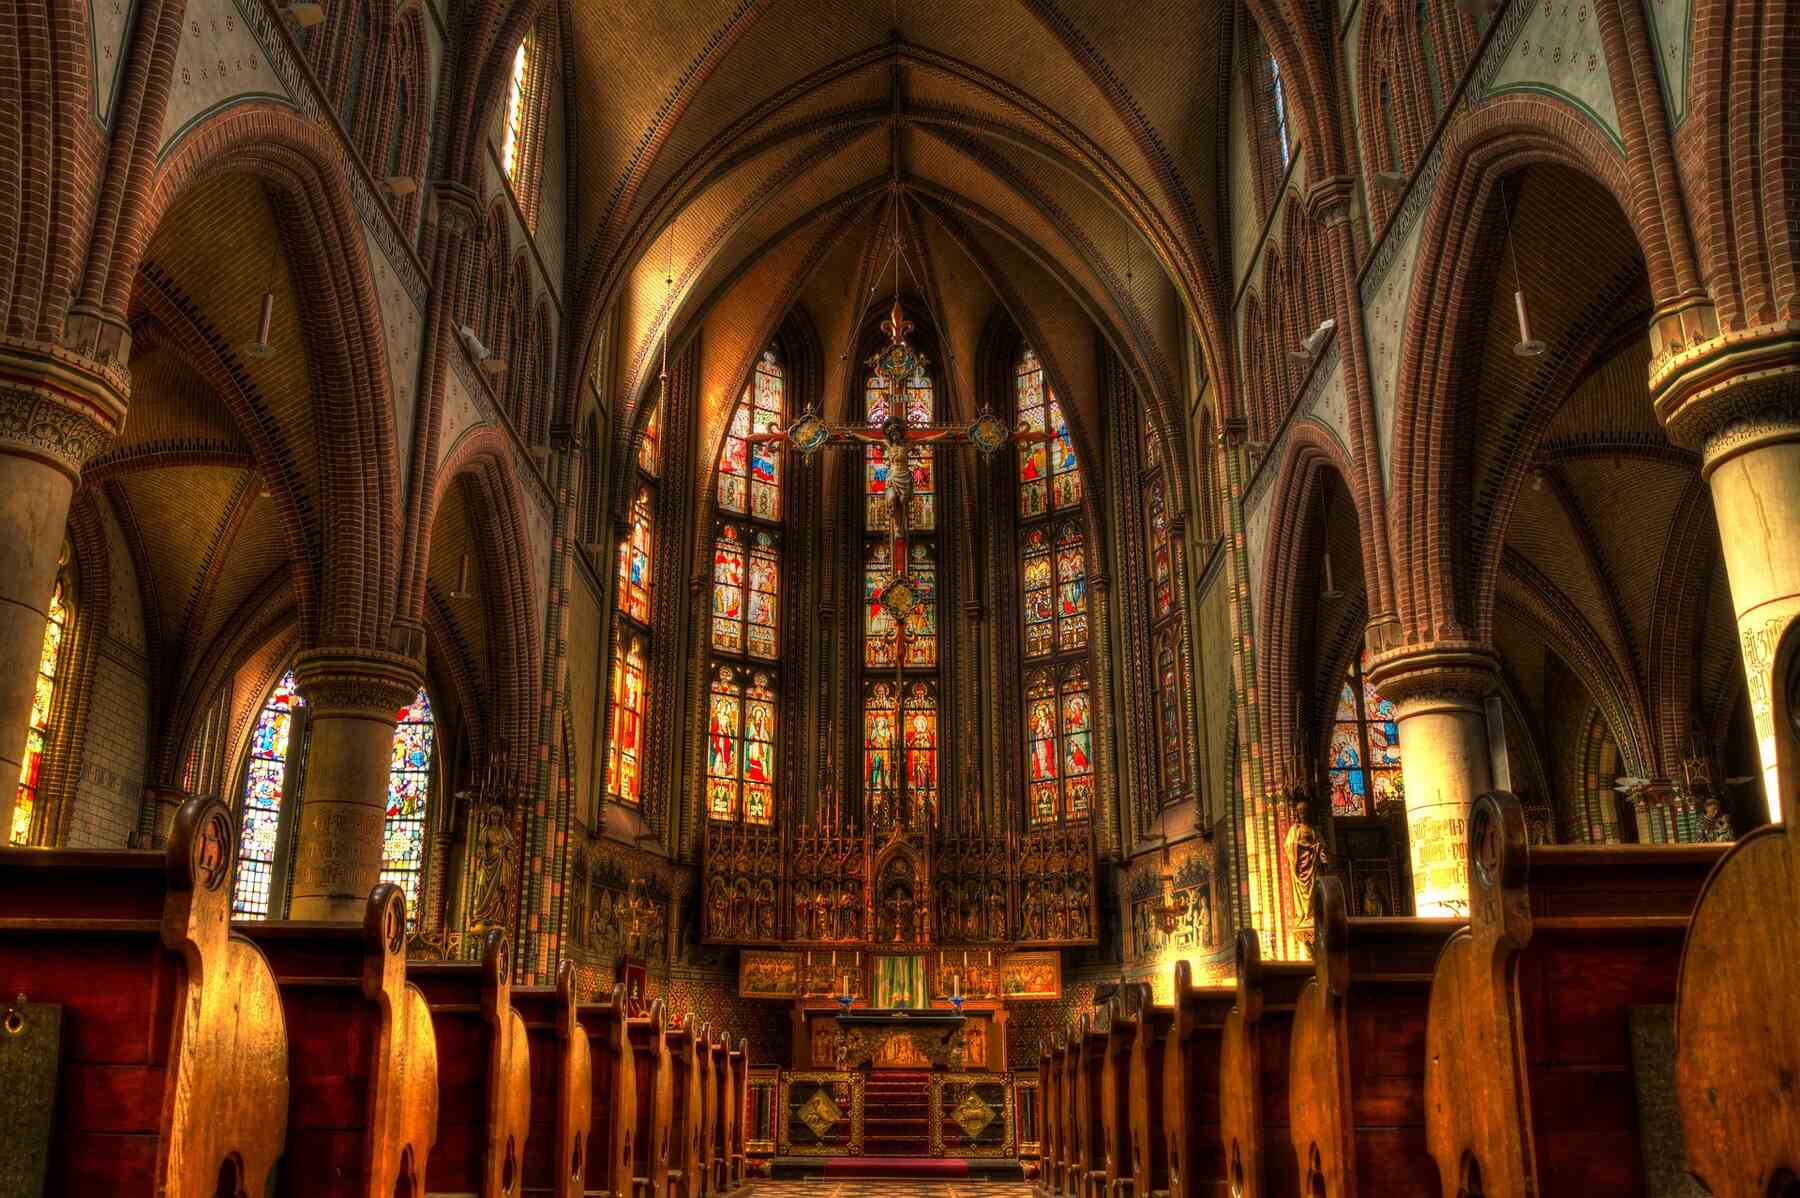 A beautiful church with rows of pews and a colorful stained glass window